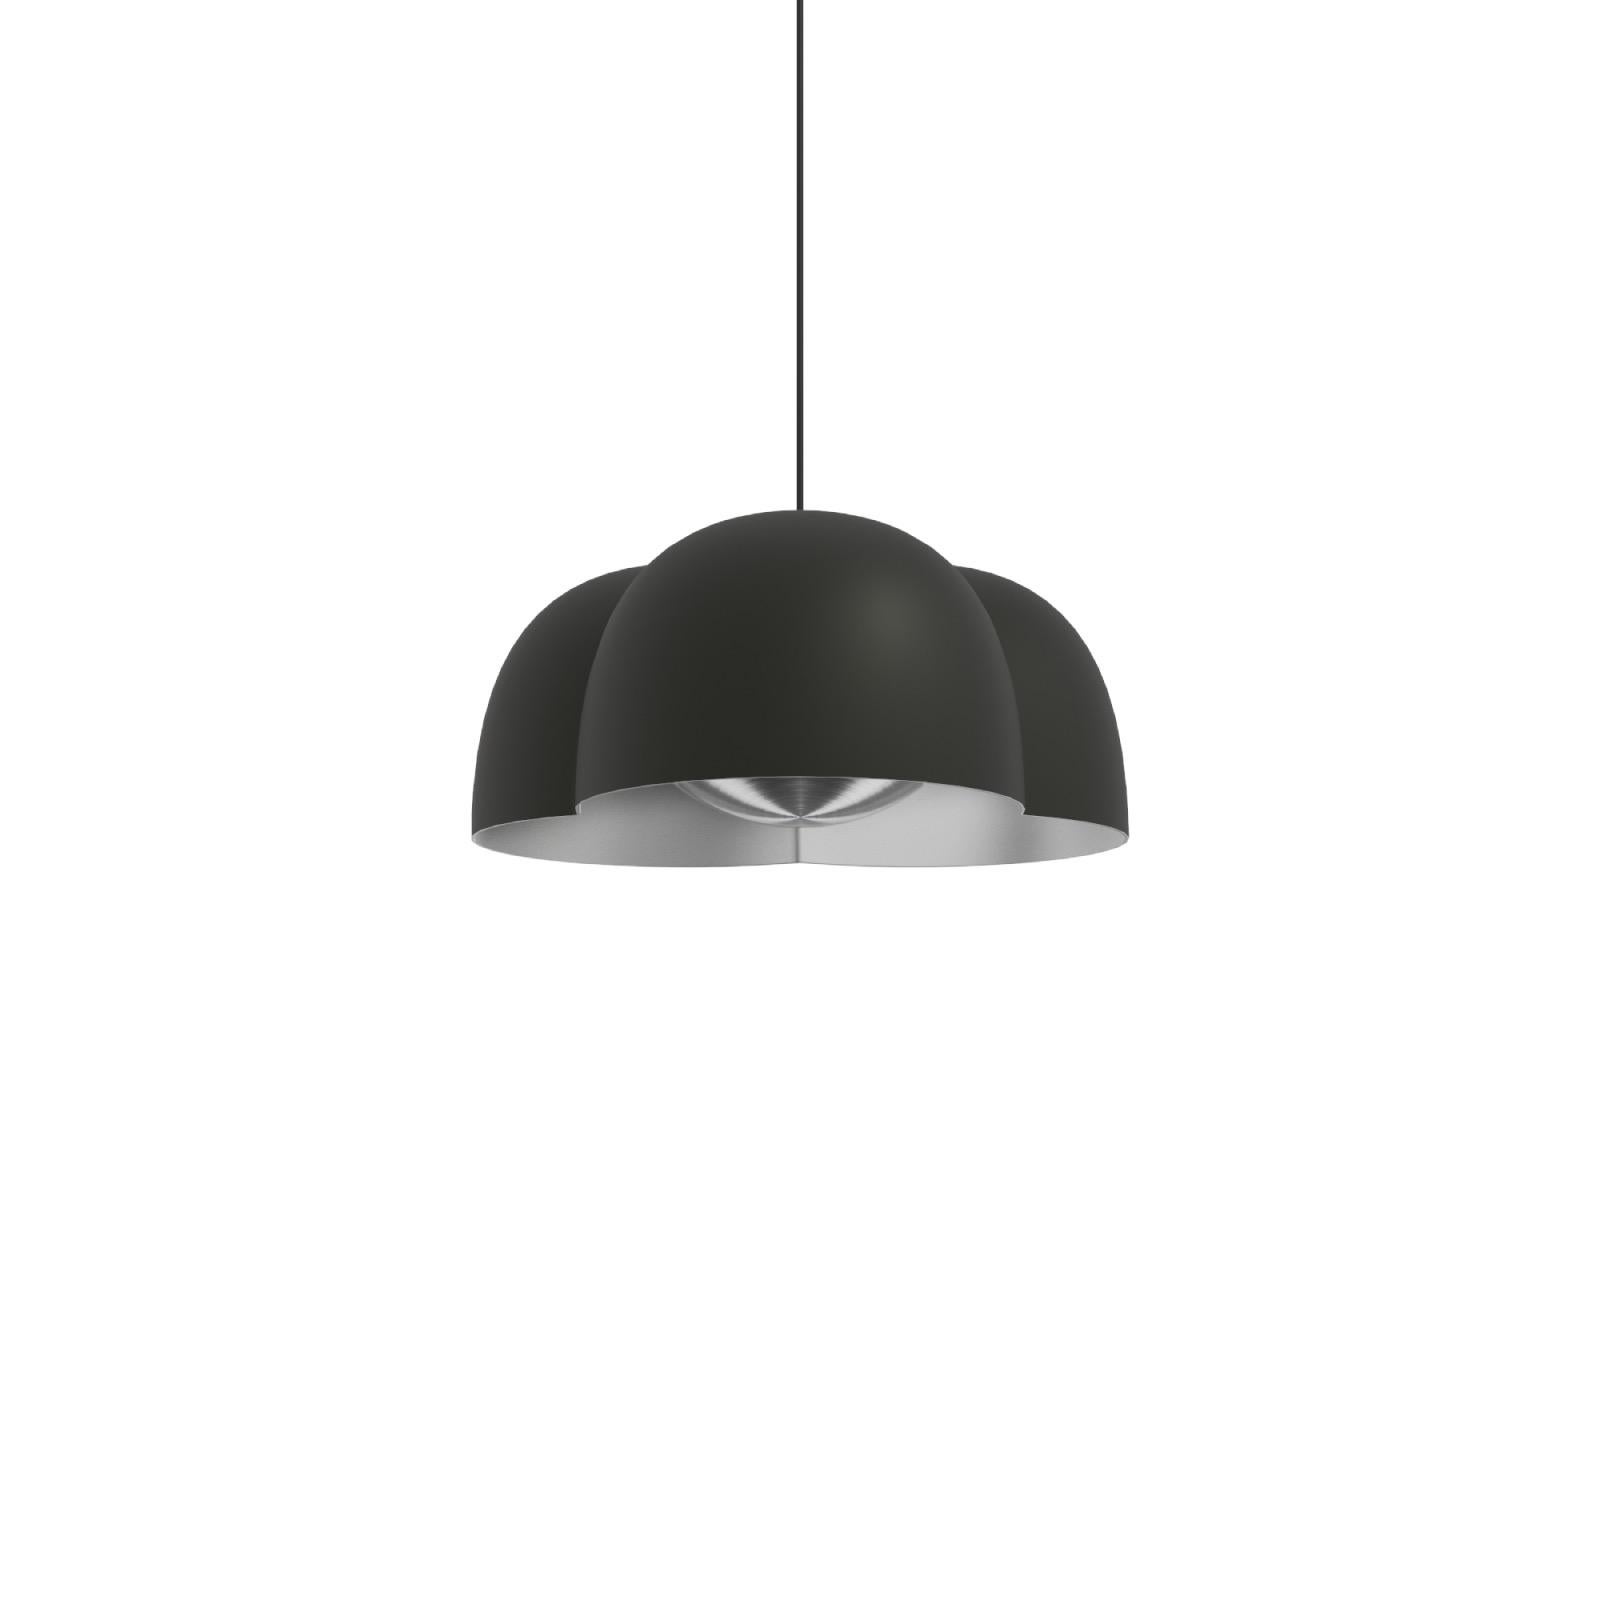 Aluminum Contemporary Pendant Lamp 'Cotton' by Ago, Large, Chocolate For Sale